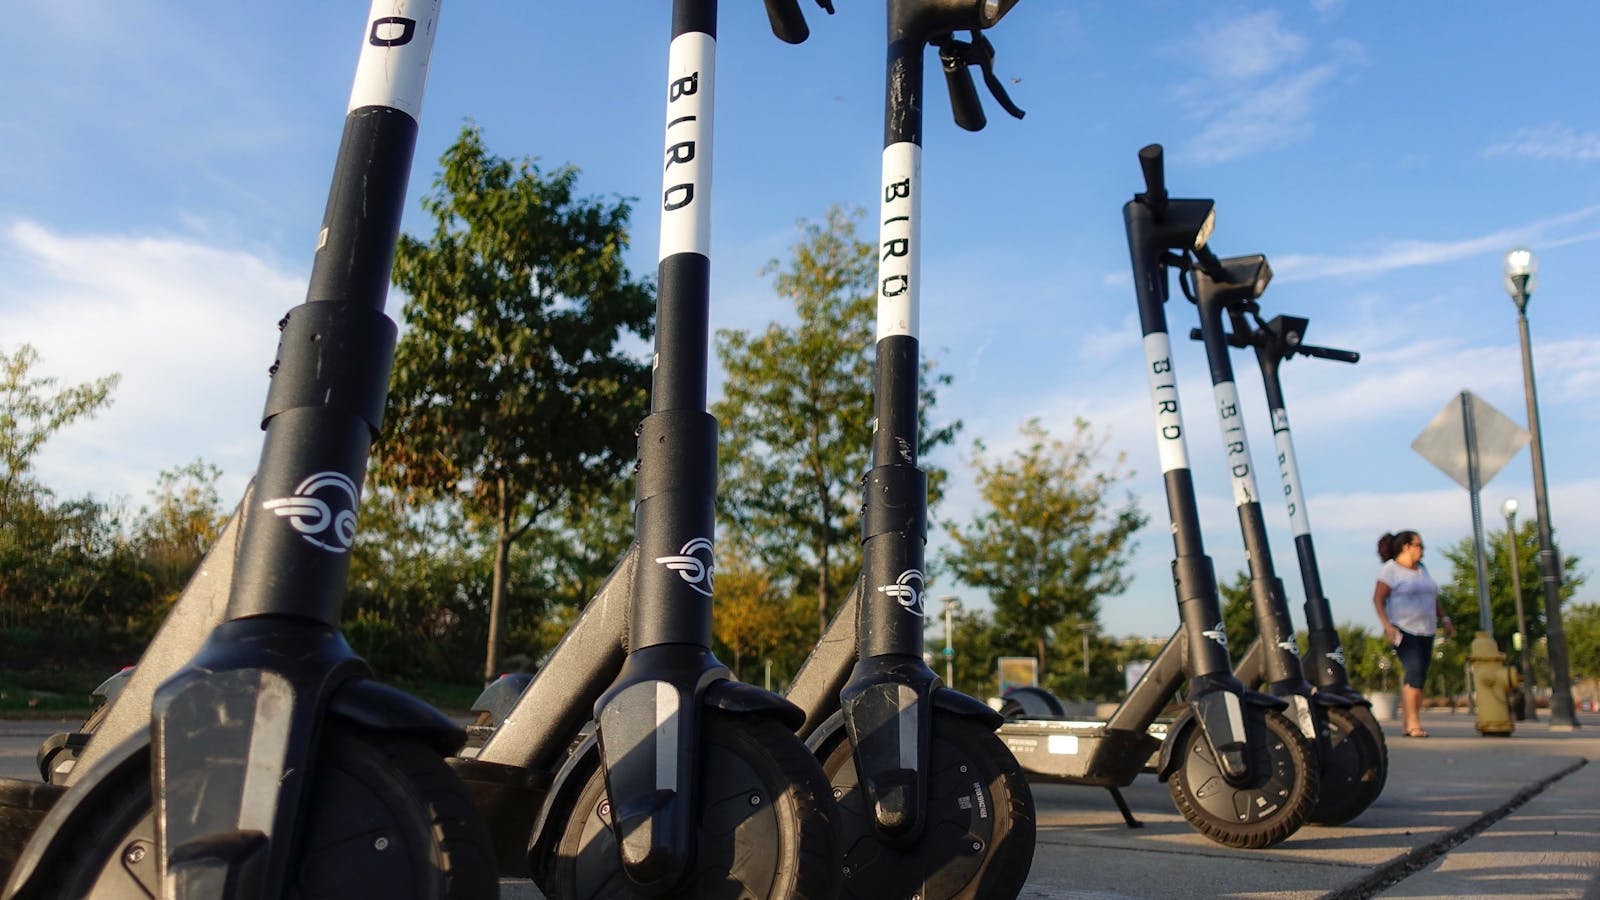 Scooter rental startup Bird has laid off significant numbers of staff in the U.S., but not in Amsterdam. Photo: AP